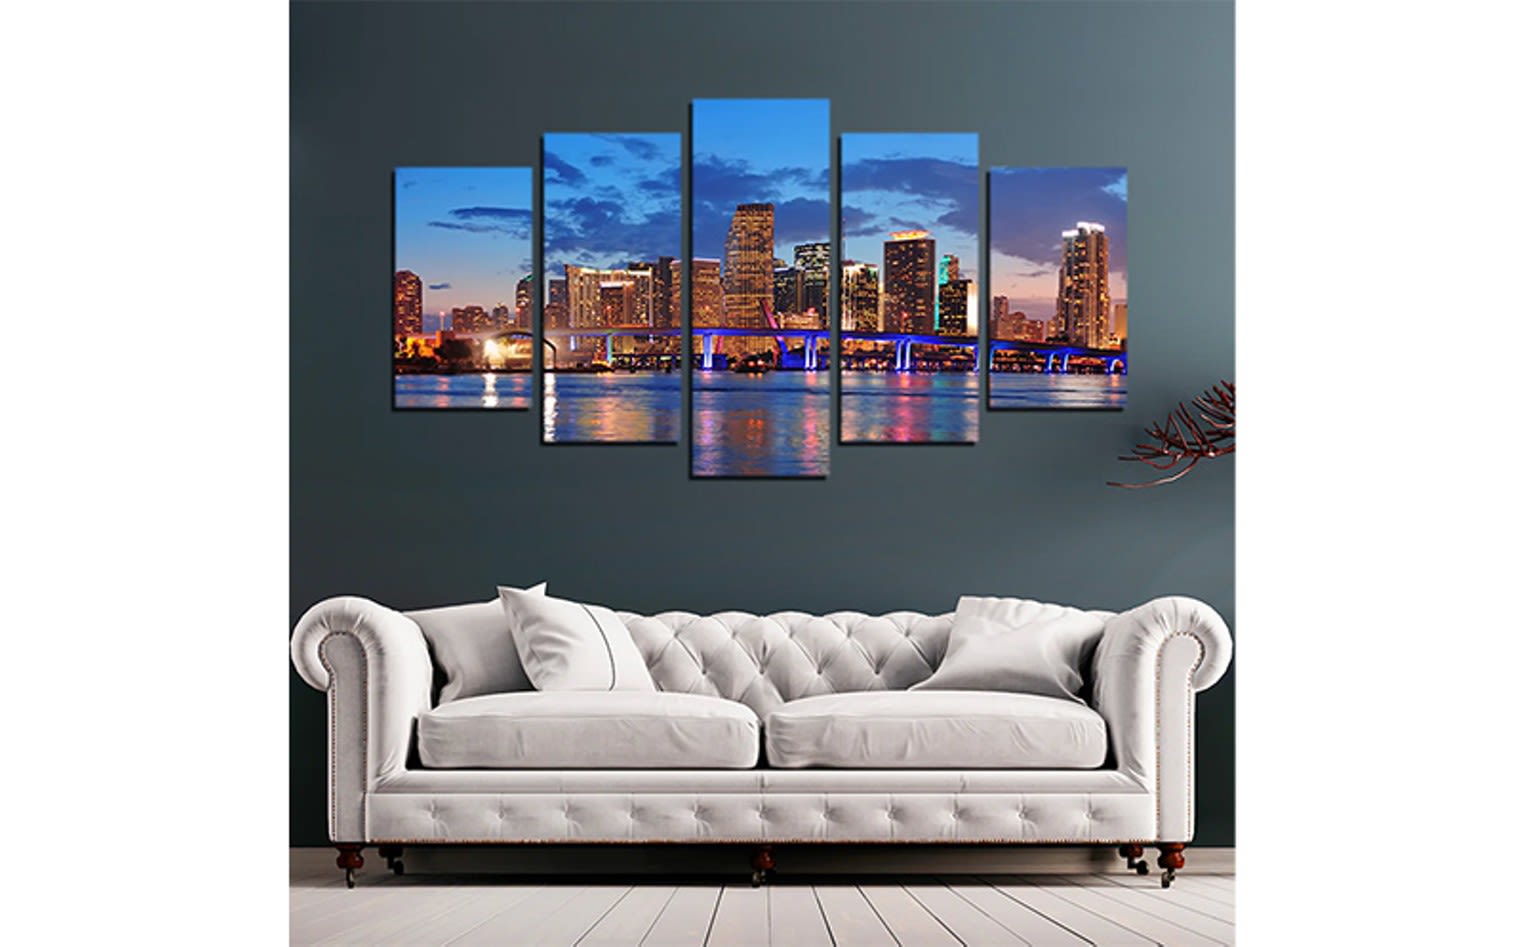 Miami Wall Art: Choosing the Best Artwork for Your New Apartment